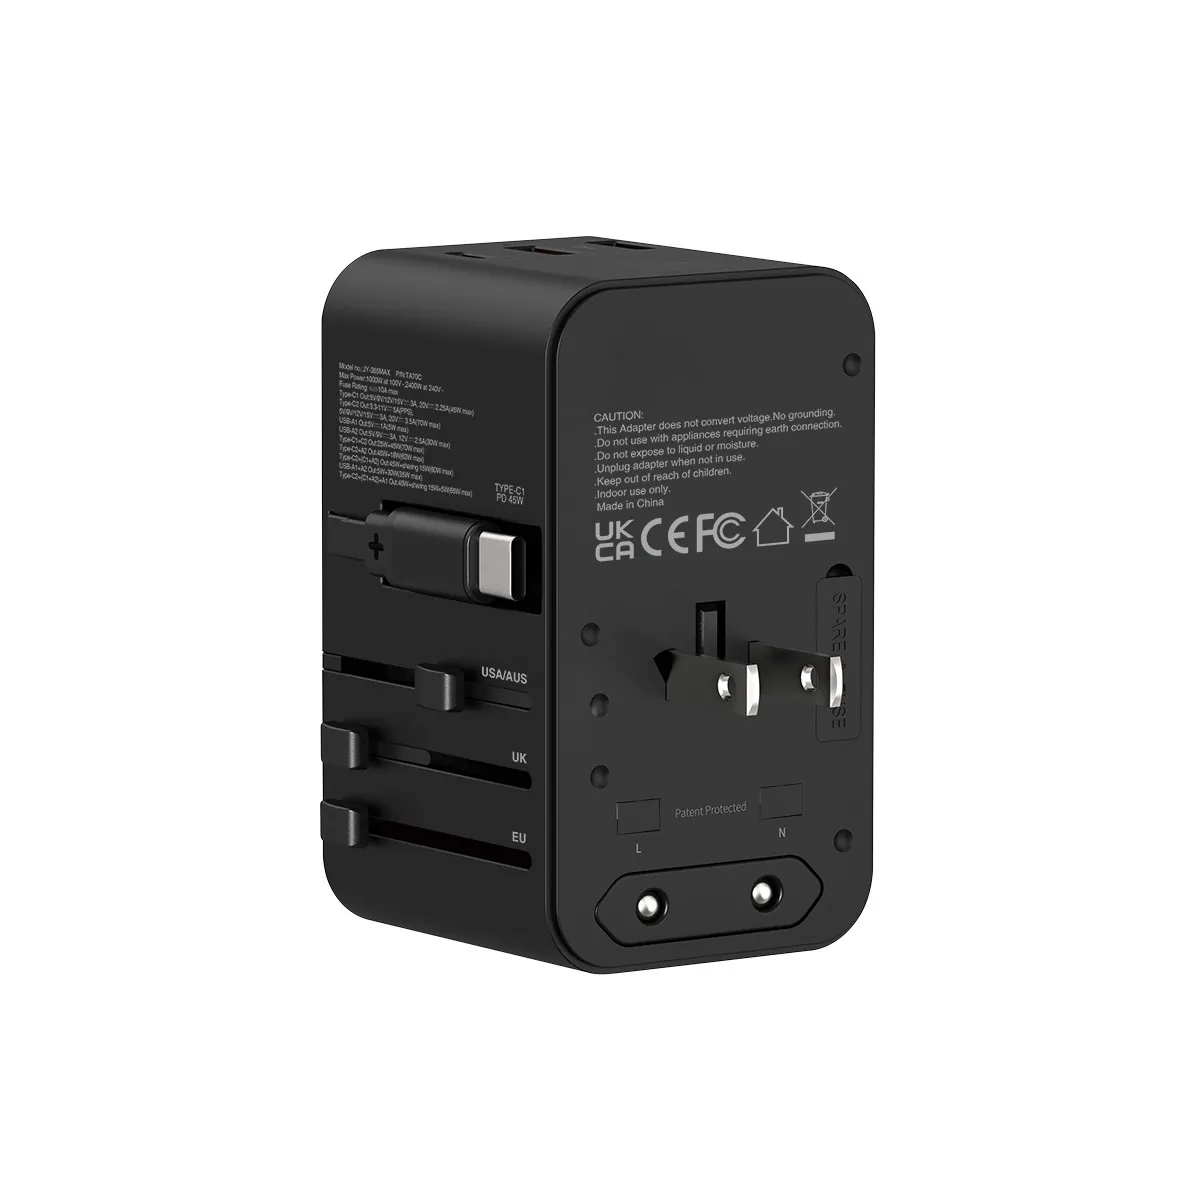 Travel Adaptor With Built-in Cable & 70W GaN Charger Ports